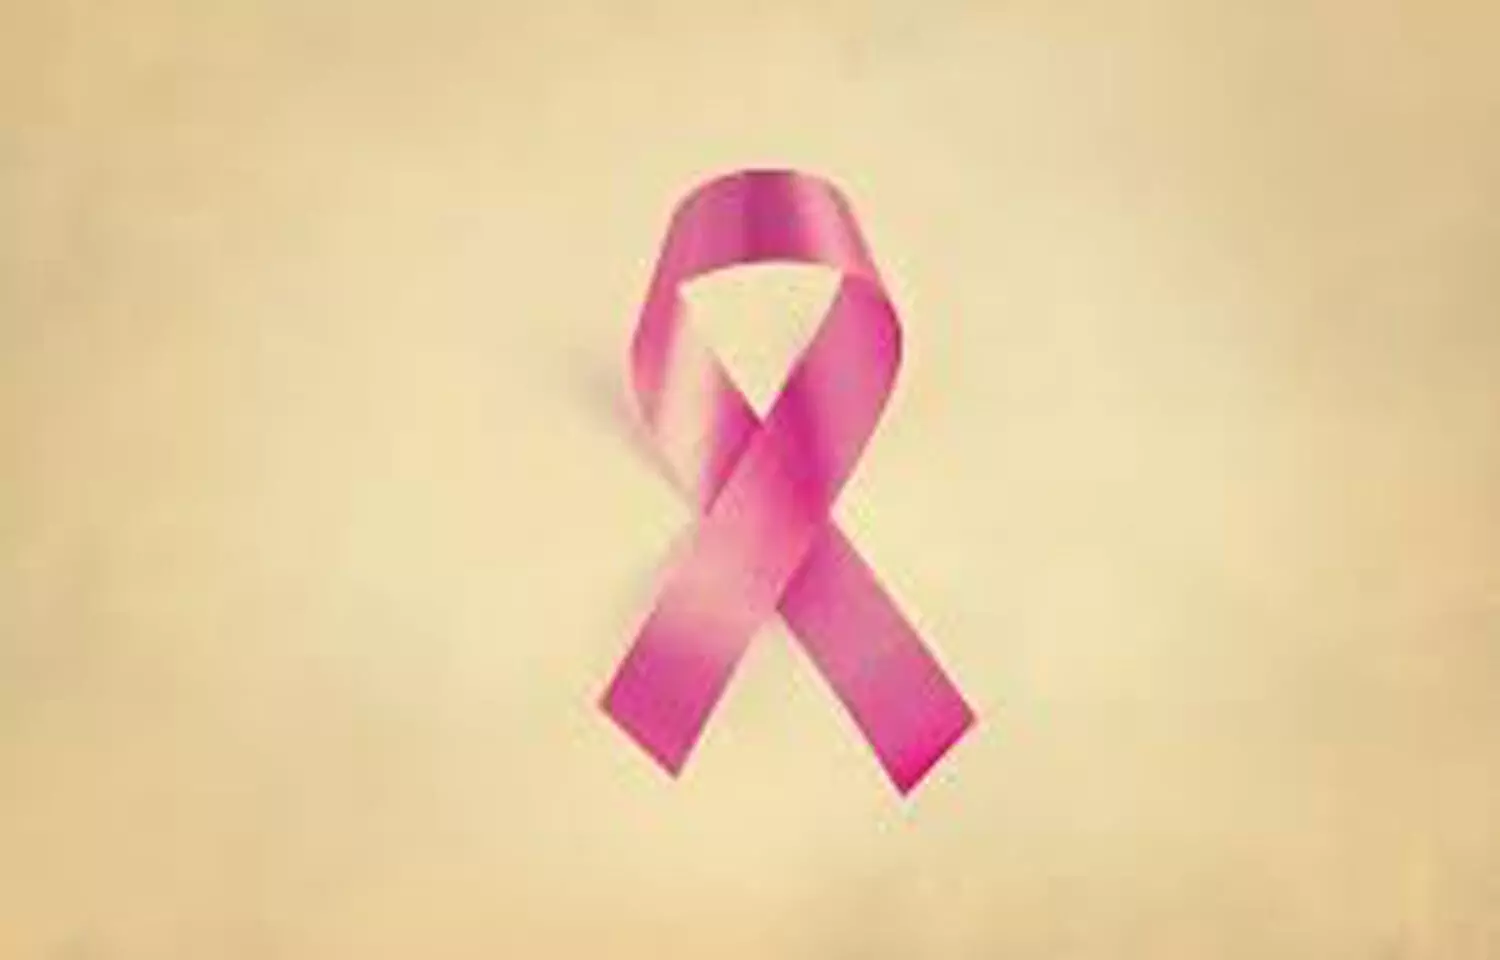 Breast cancer survivors at increased risk of diabetes and hypertension: ASCO